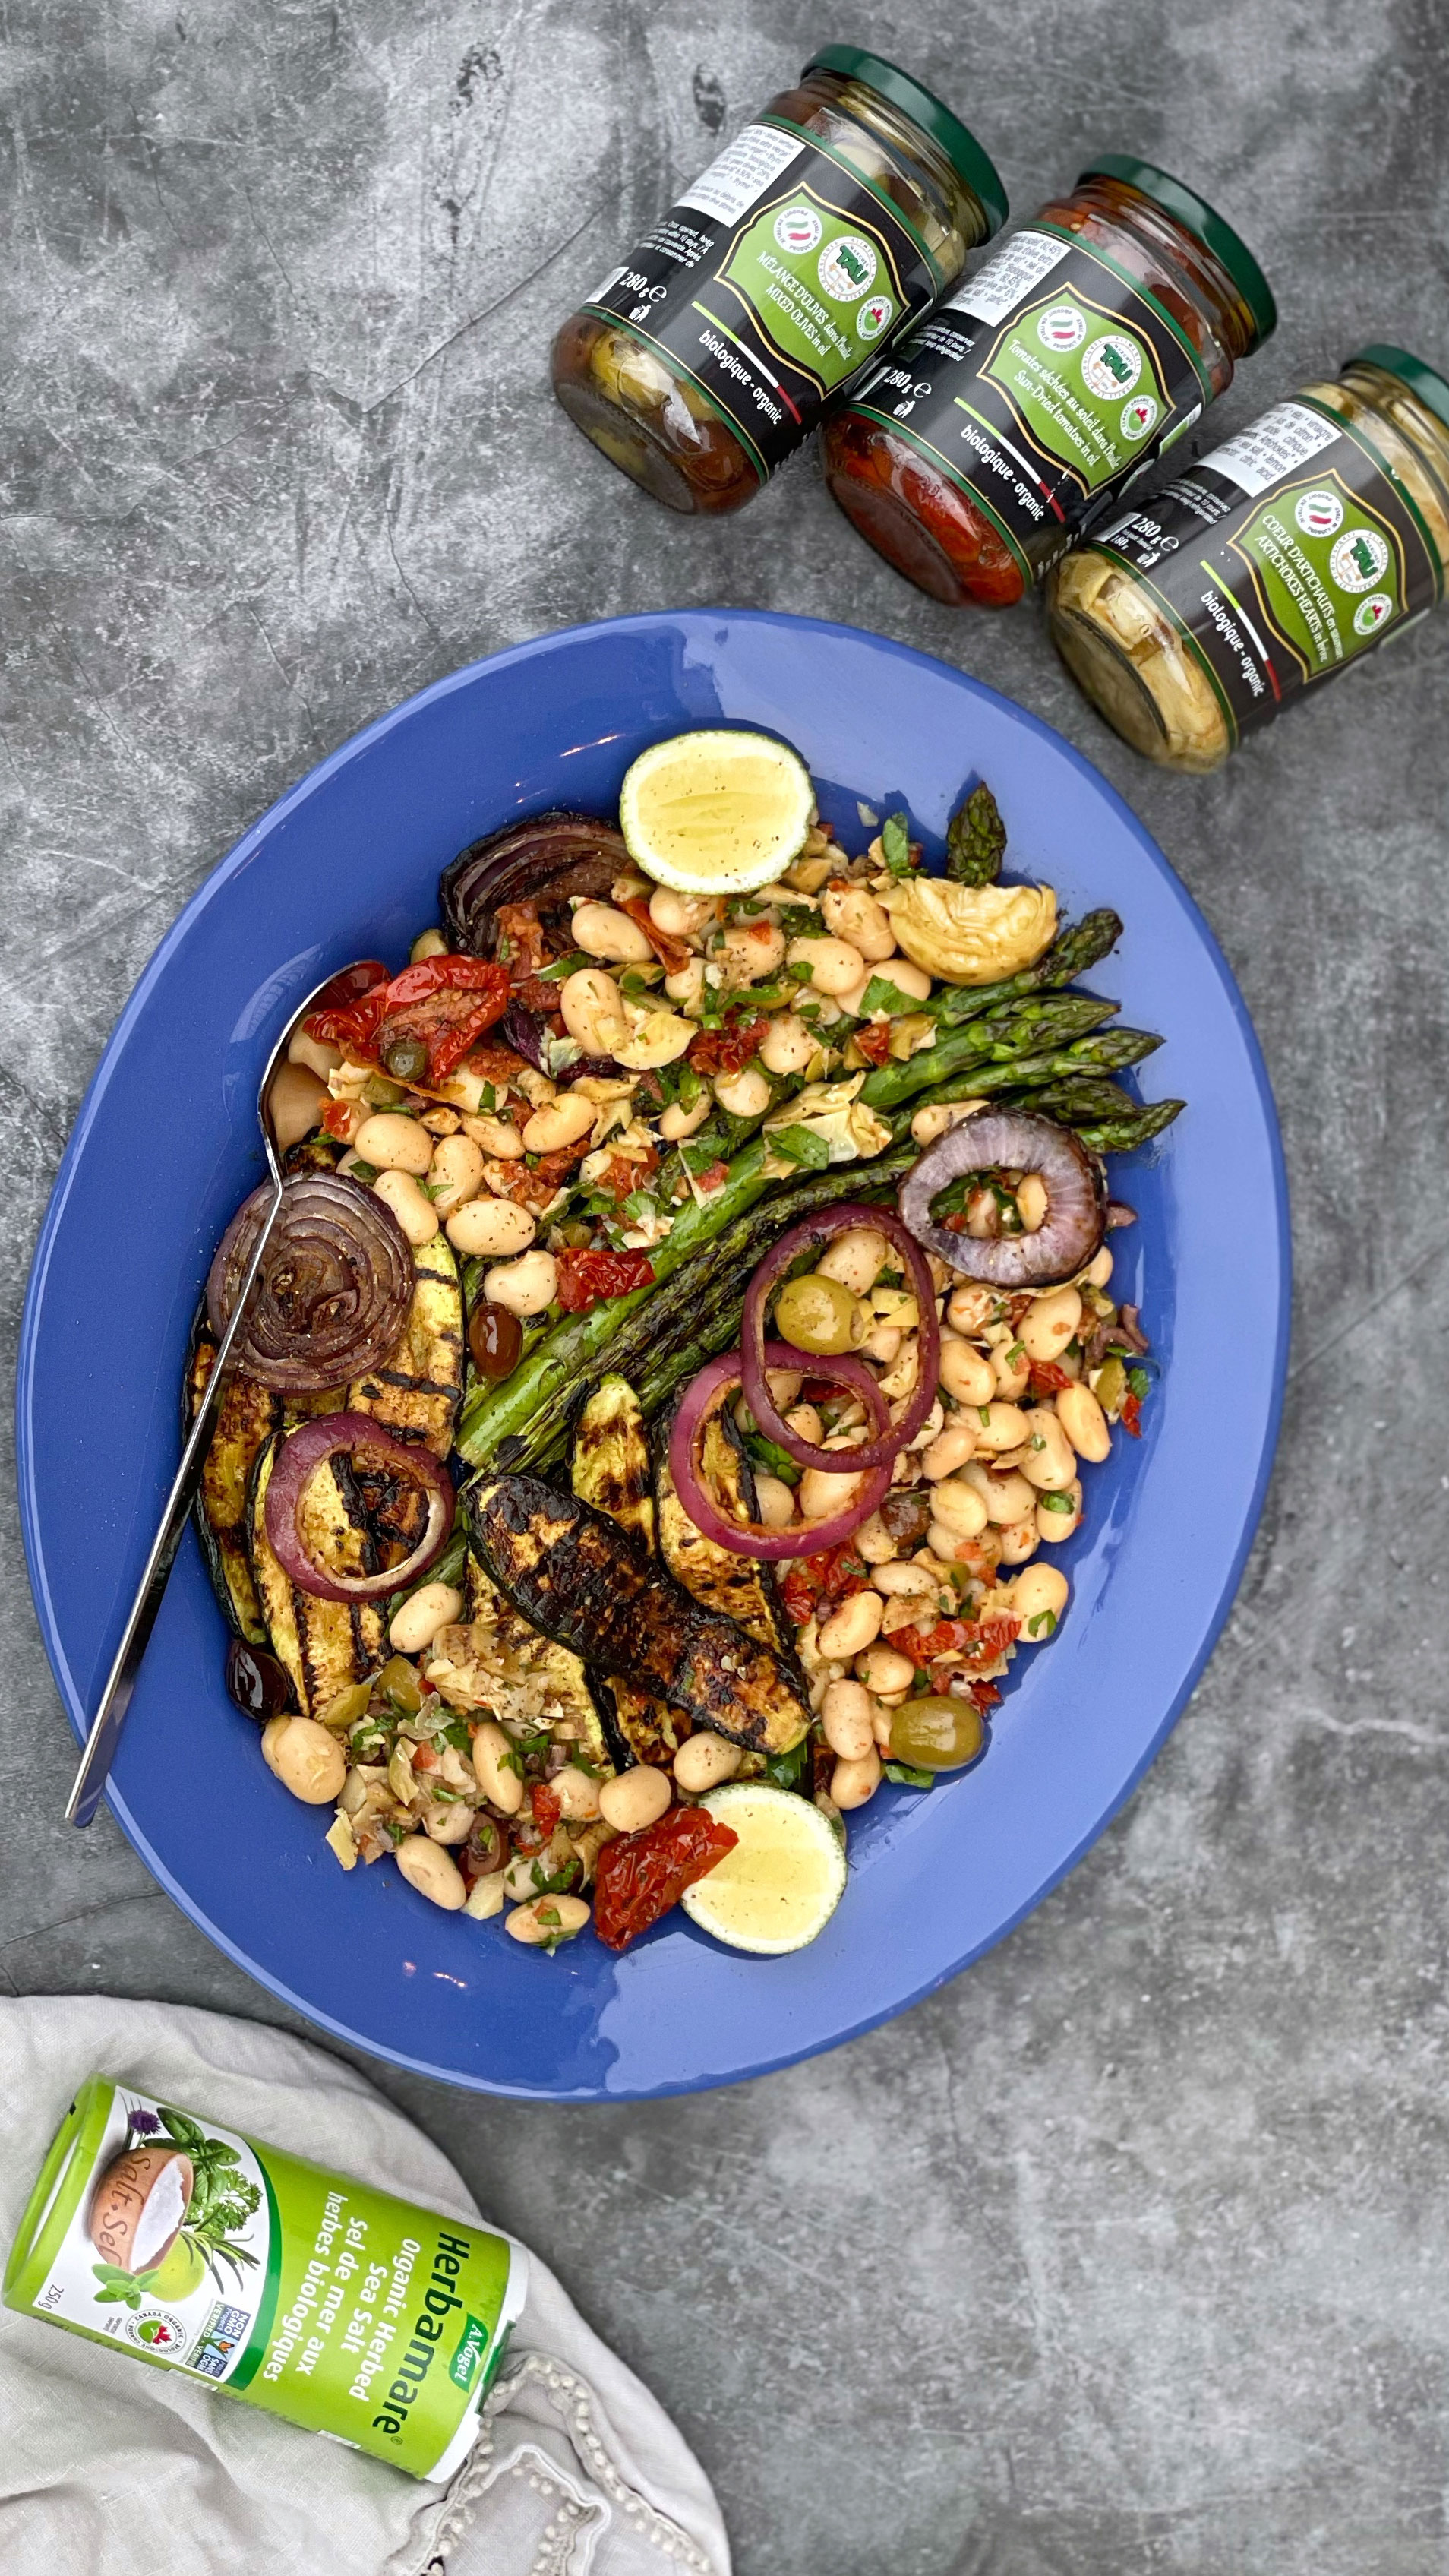 Butter Beans, Grilled Vegetables and Antipasti Salad